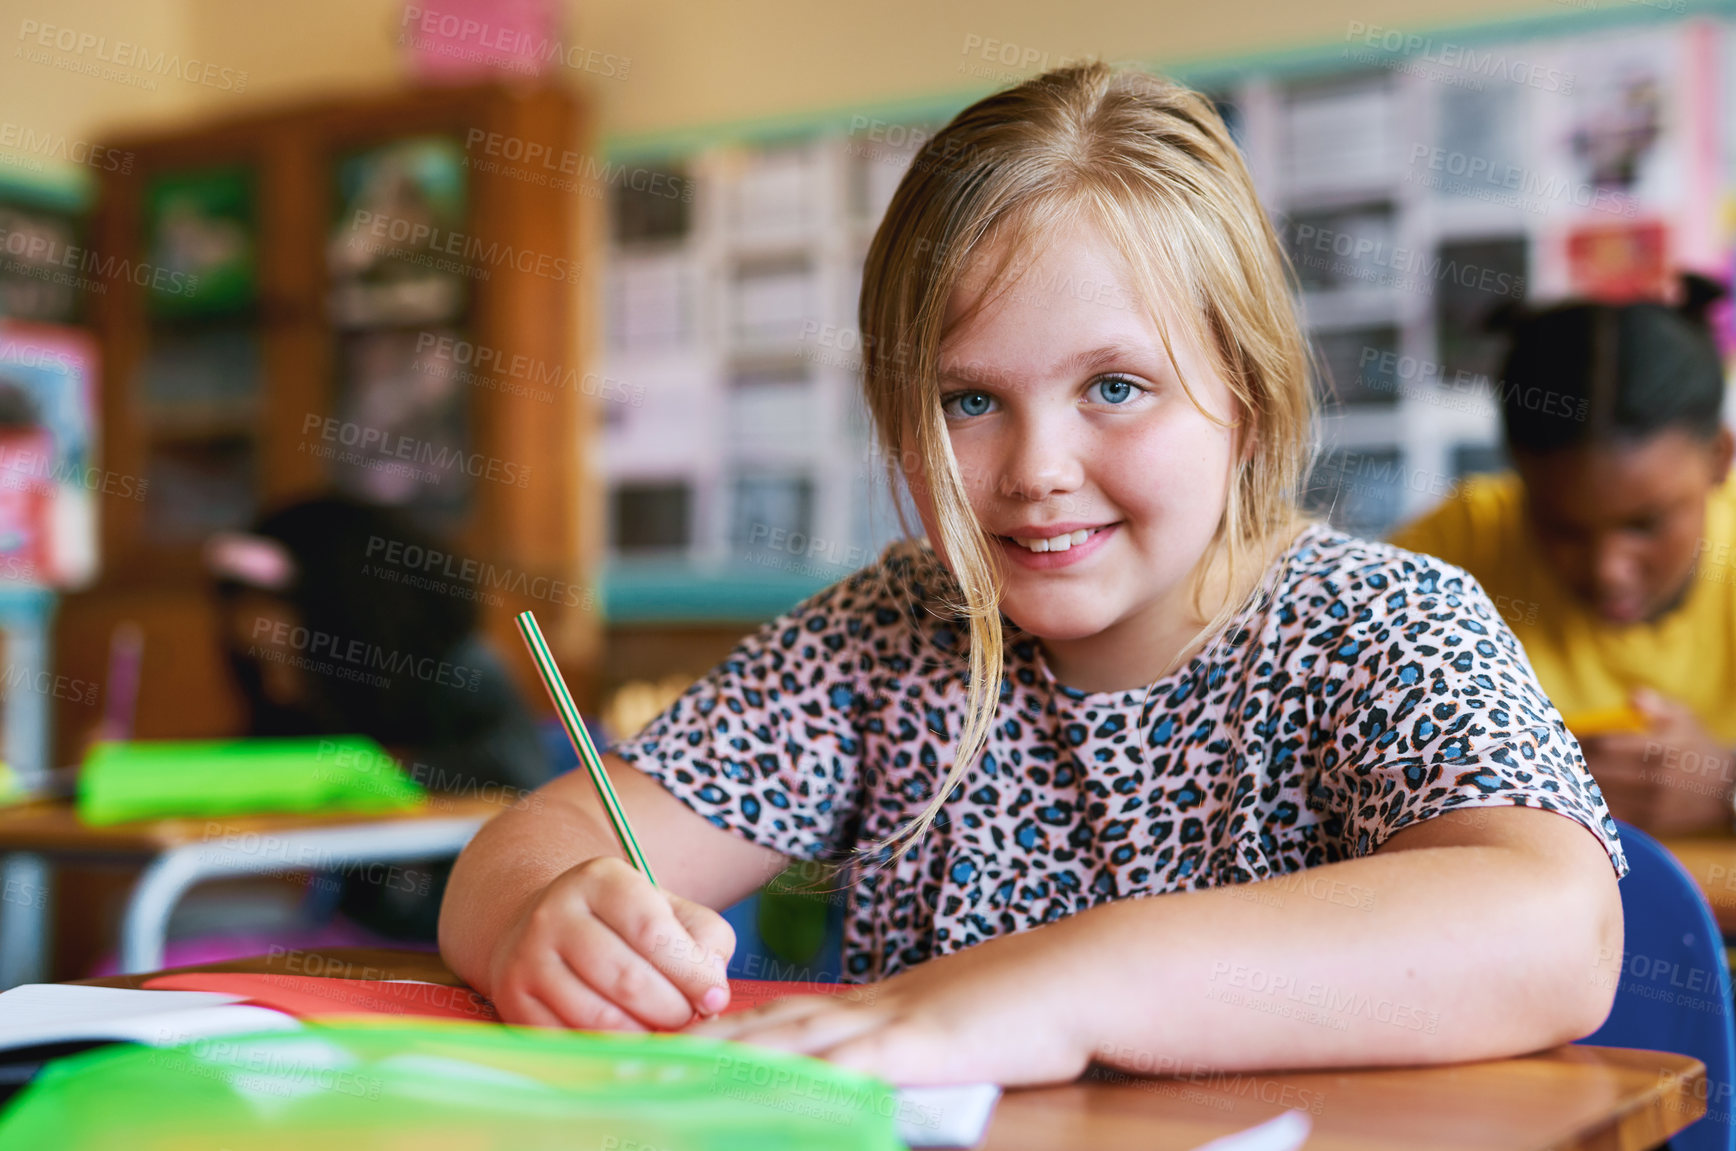 Buy stock photo Shot of a young girl sitting in her classroom at school and writing in her workbook